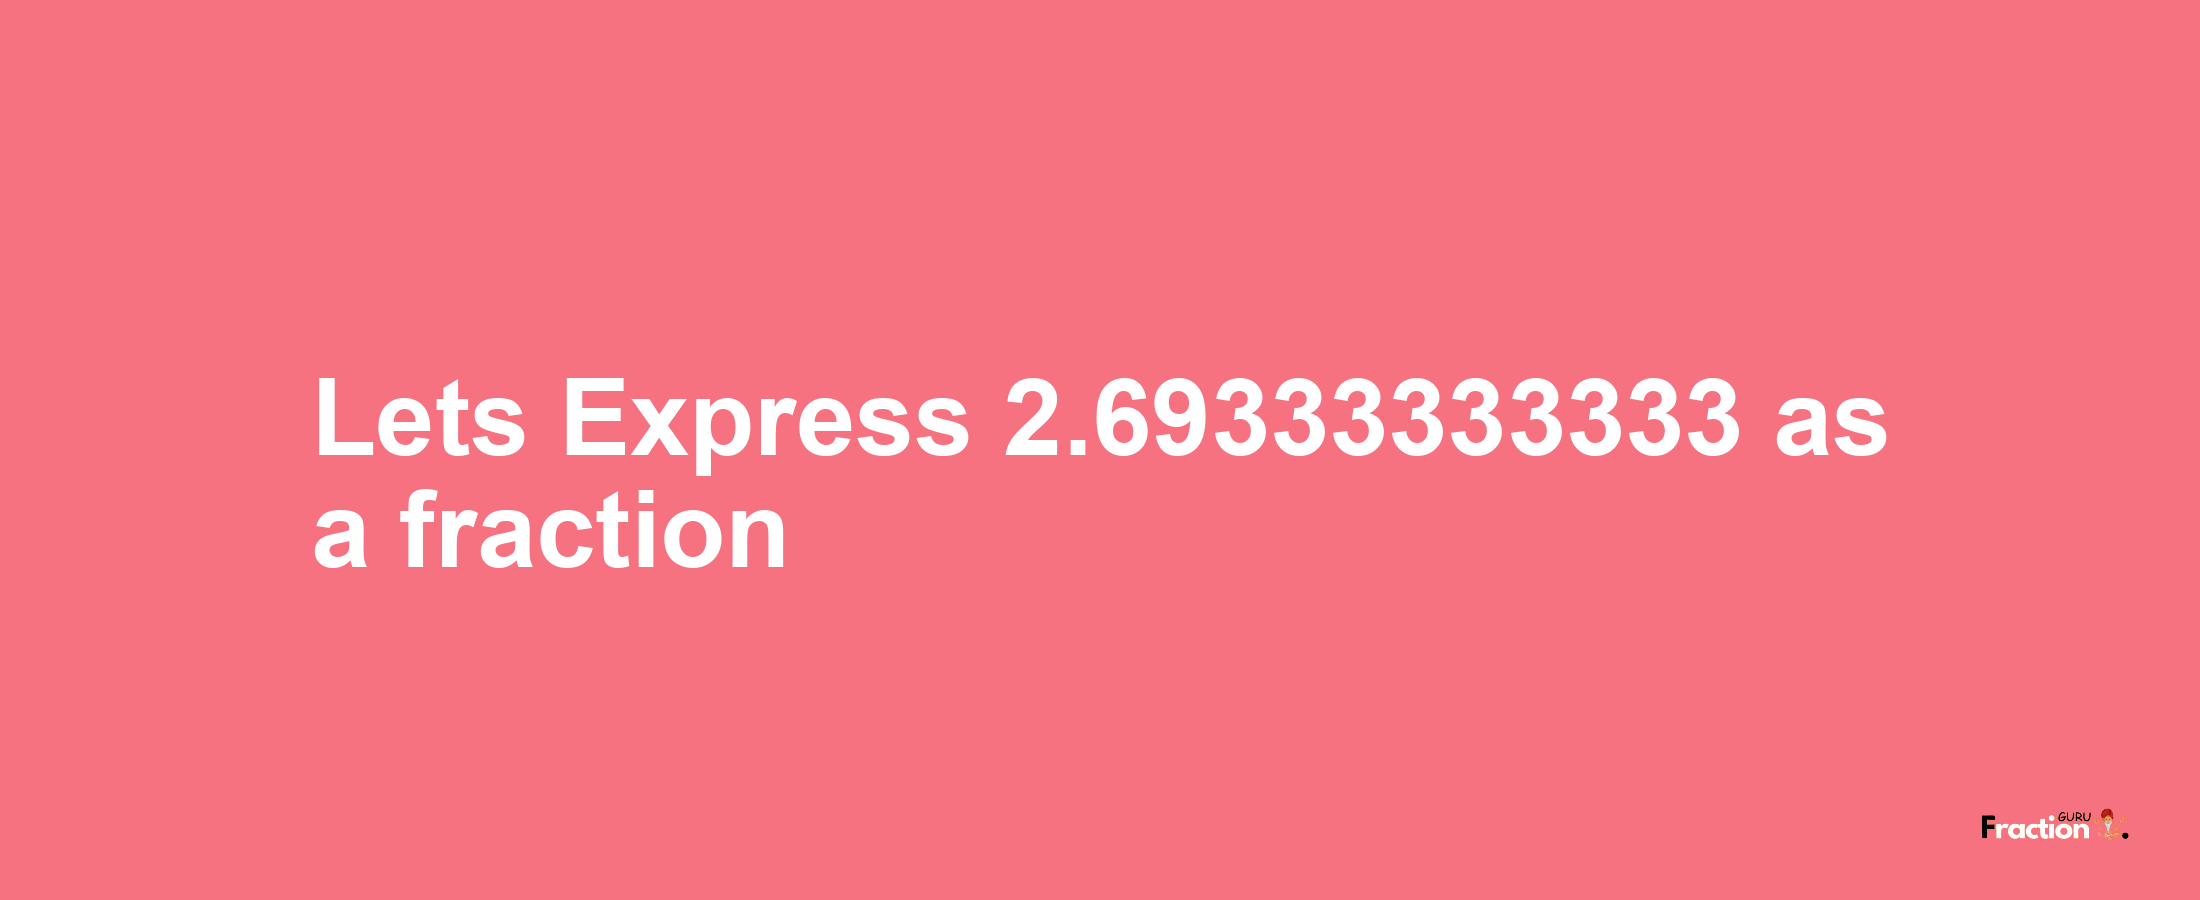 Lets Express 2.69333333333 as afraction